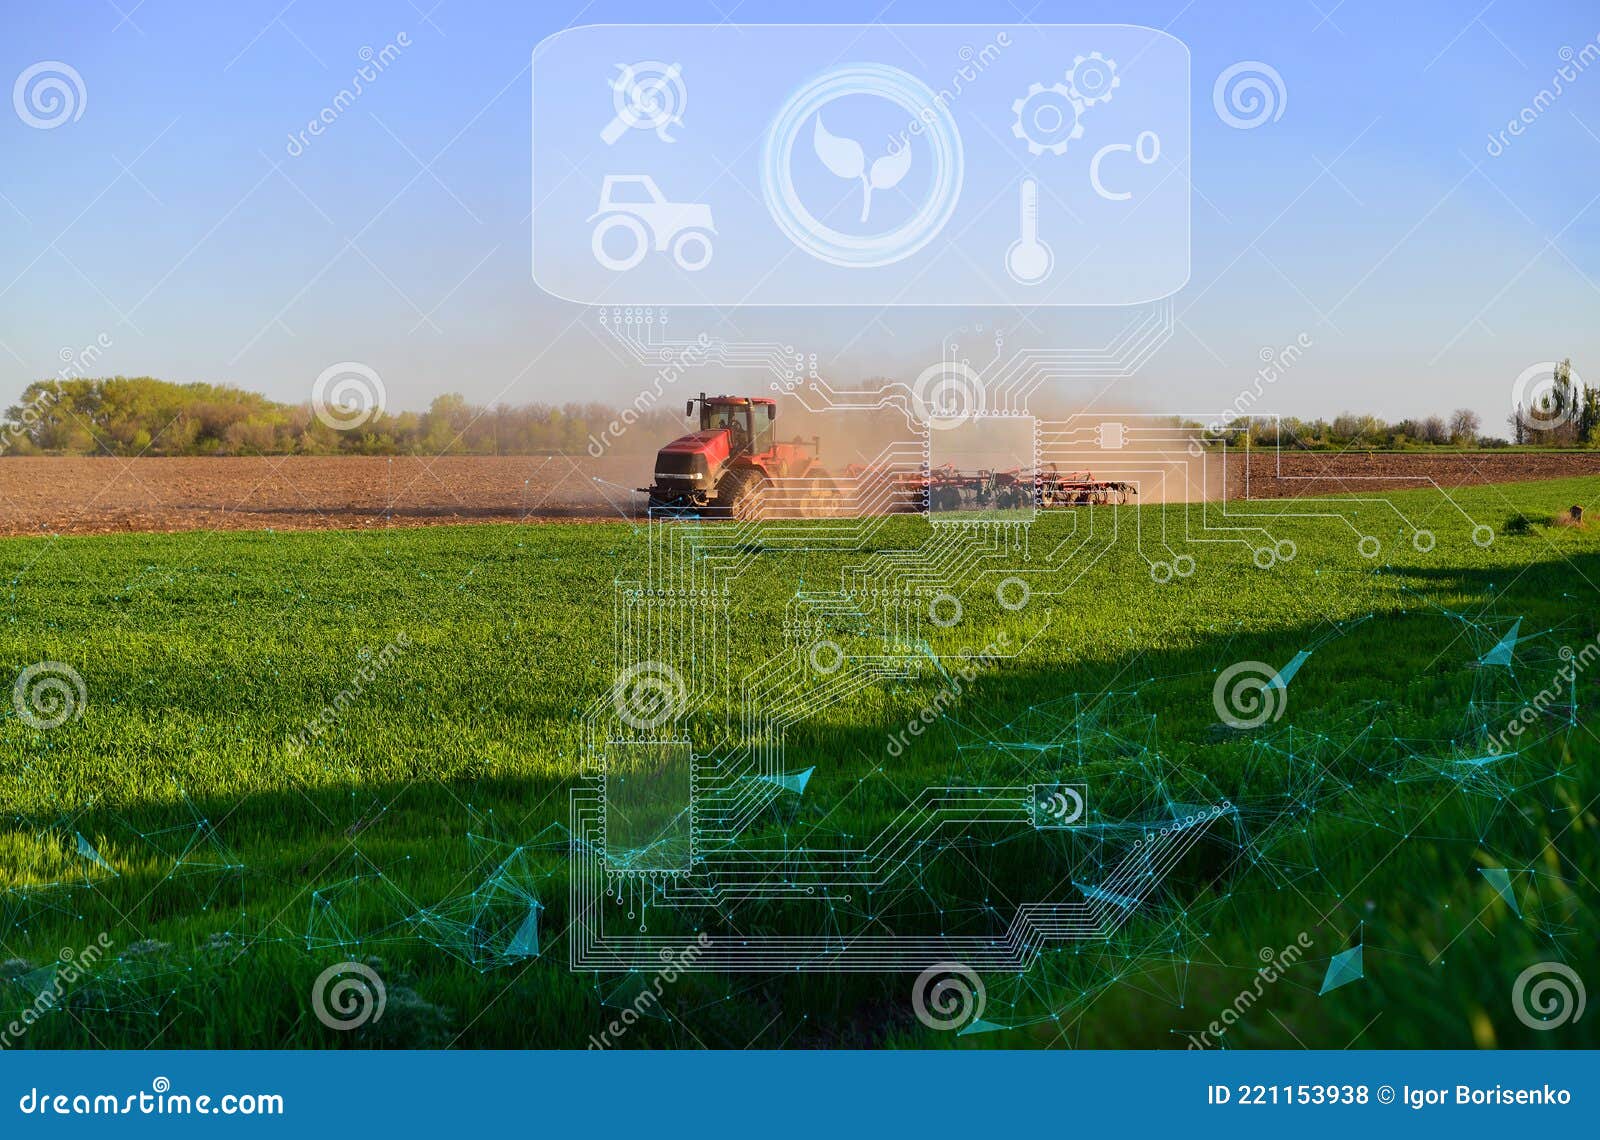 remote automated control of a tractor in agriculture. ai technologies to analyze data and increase productivity and yield